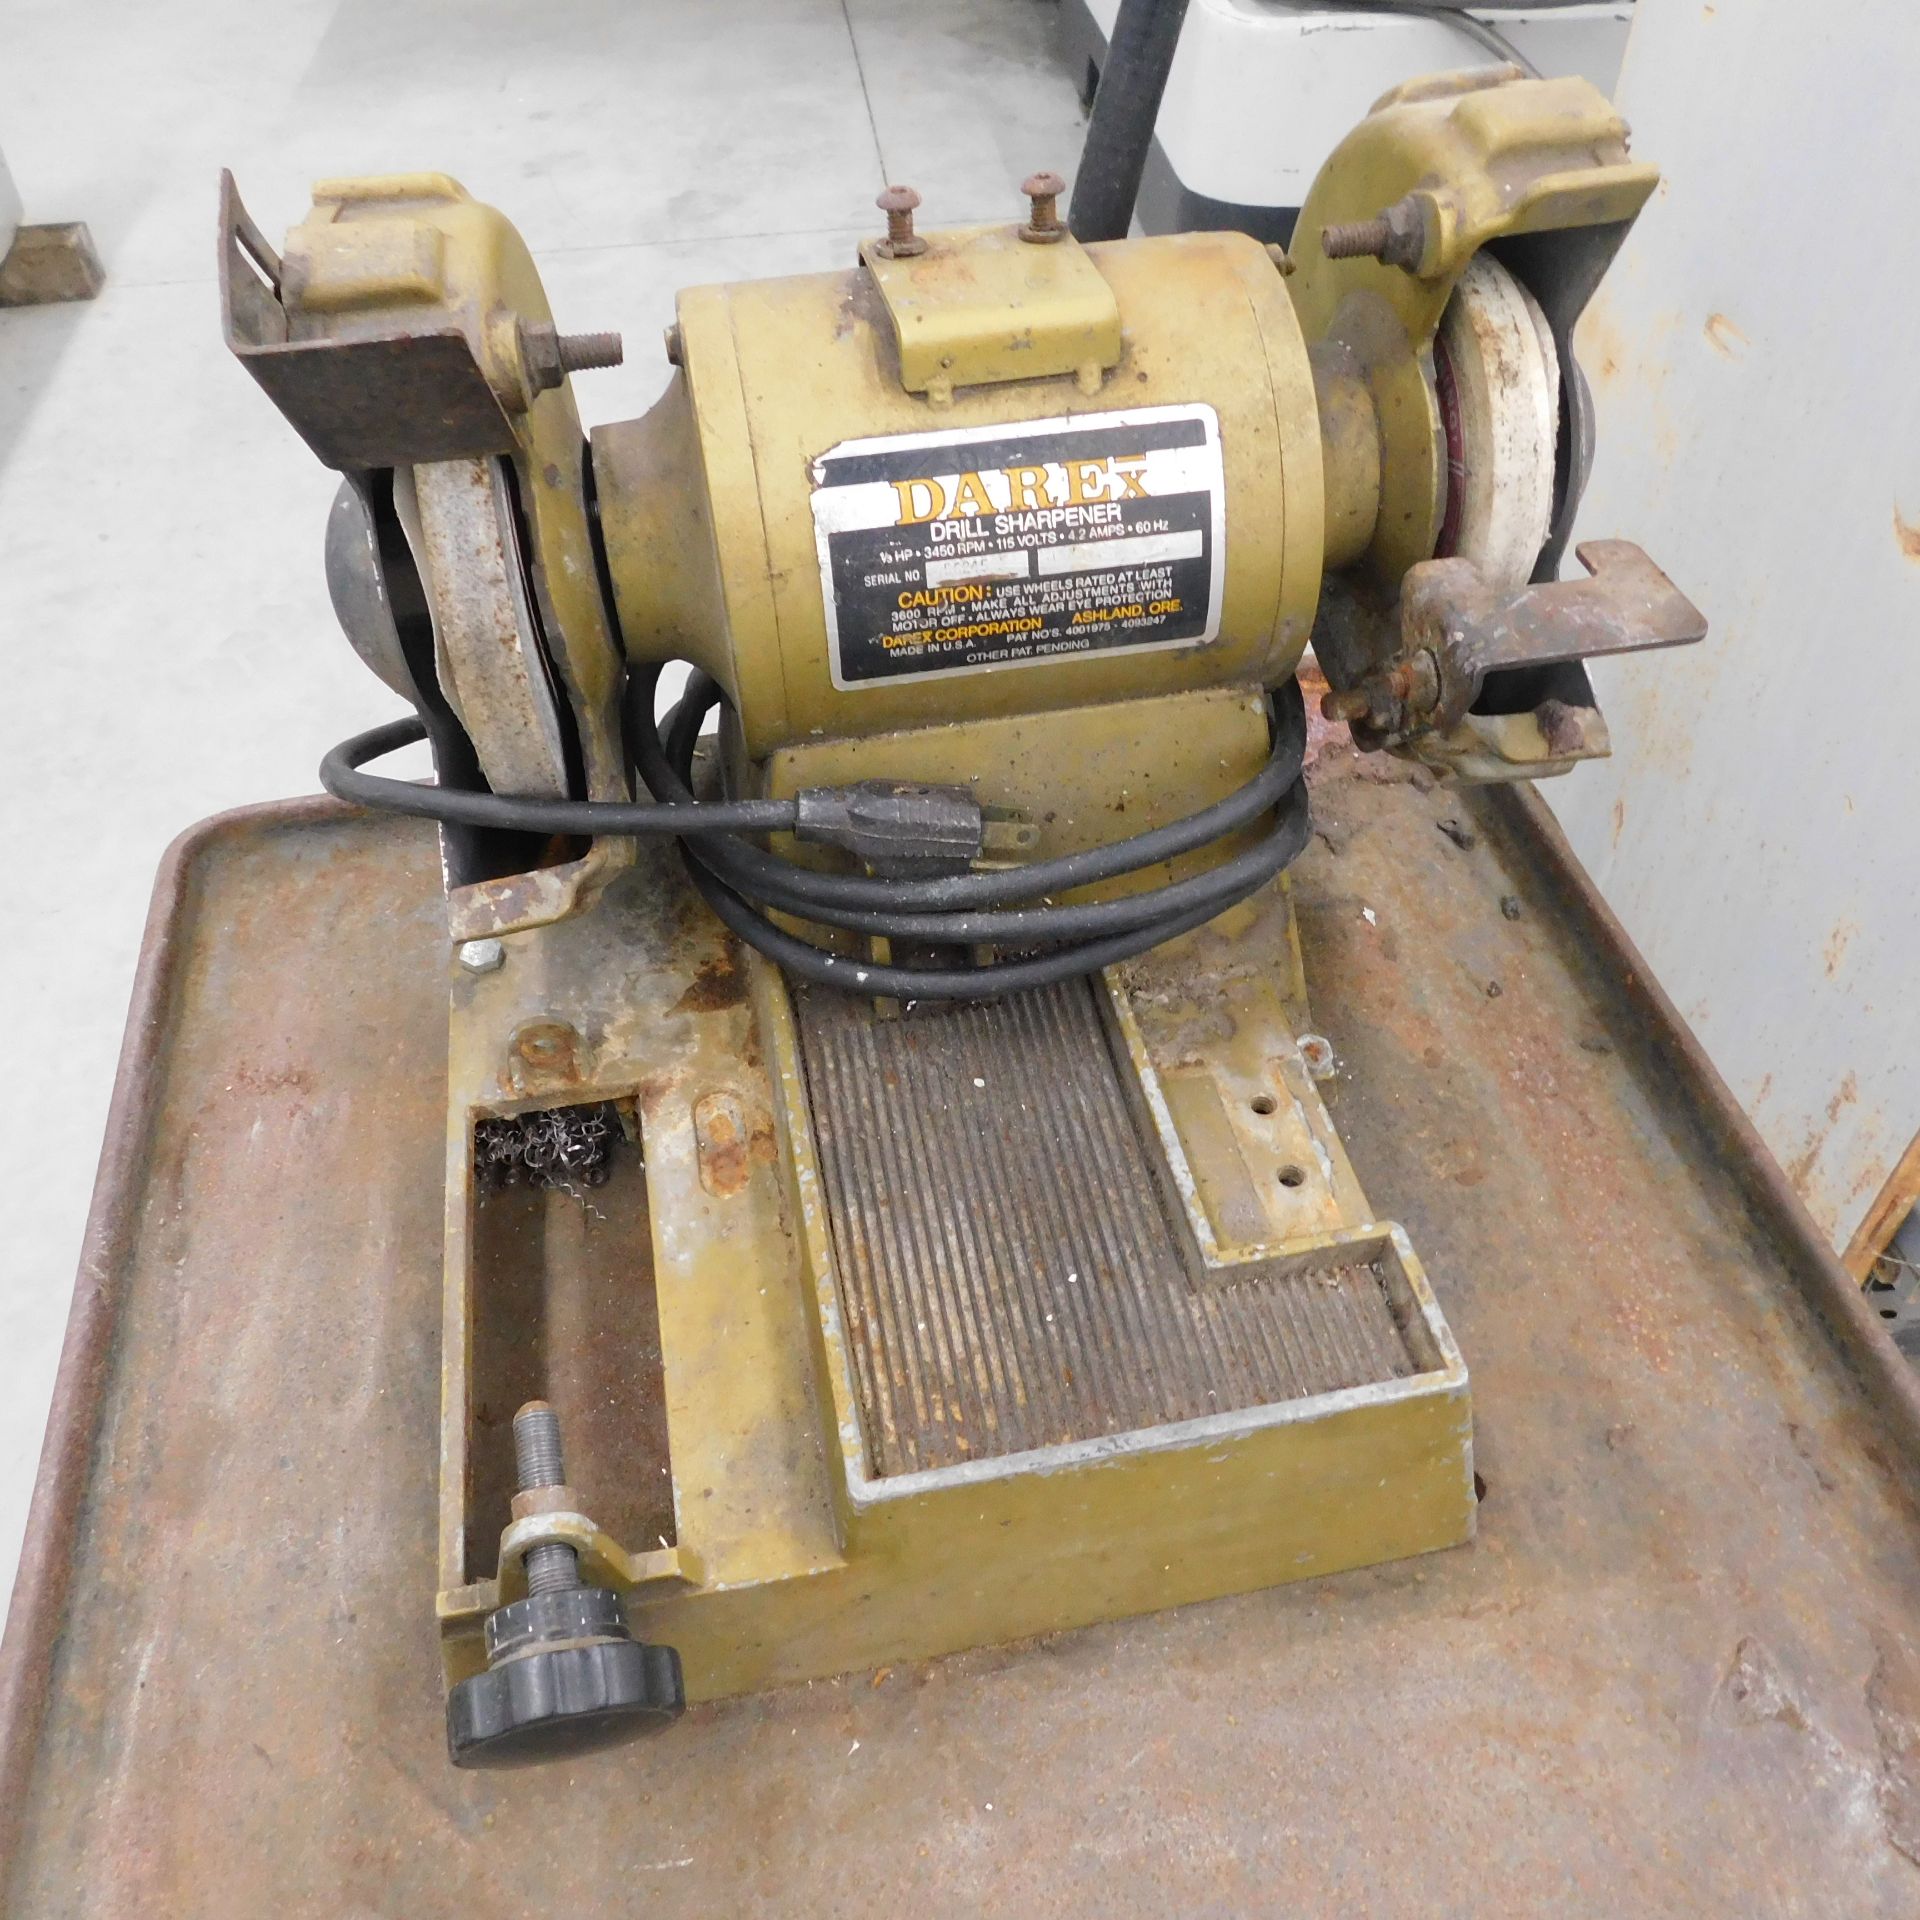 Darex Drill Sharpener, and Chicago Electric Double End Grinder